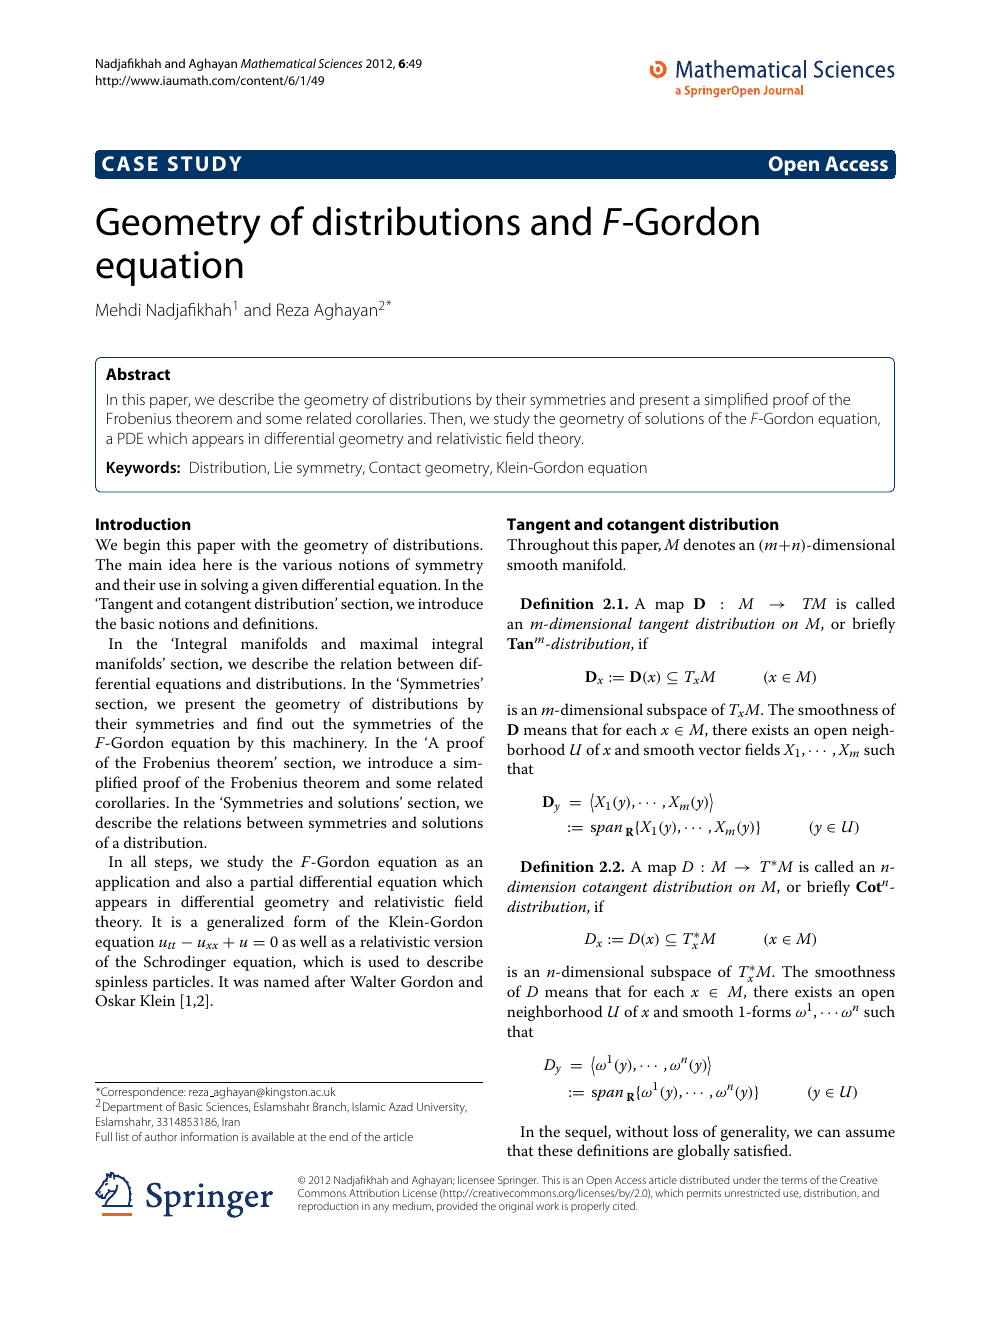 Geometry Of Distributions And F Gordon Equation Topic Of Research Paper In Mathematics Download Scholarly Article Pdf And Read For Free On Cyberleninka Open Science Hub